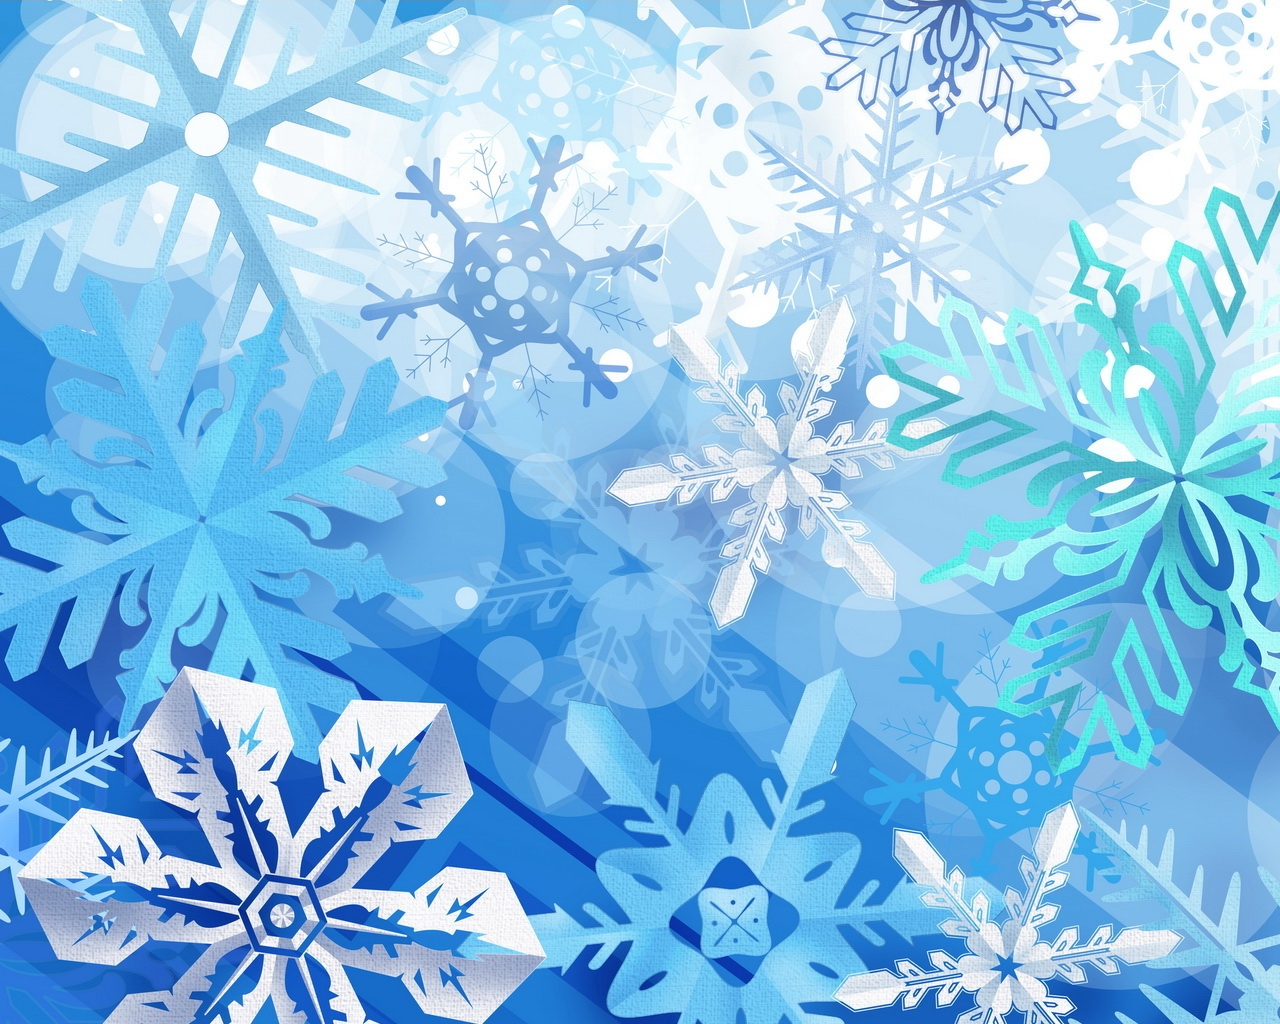 Abstract Winter Snowflakes powerpoint background